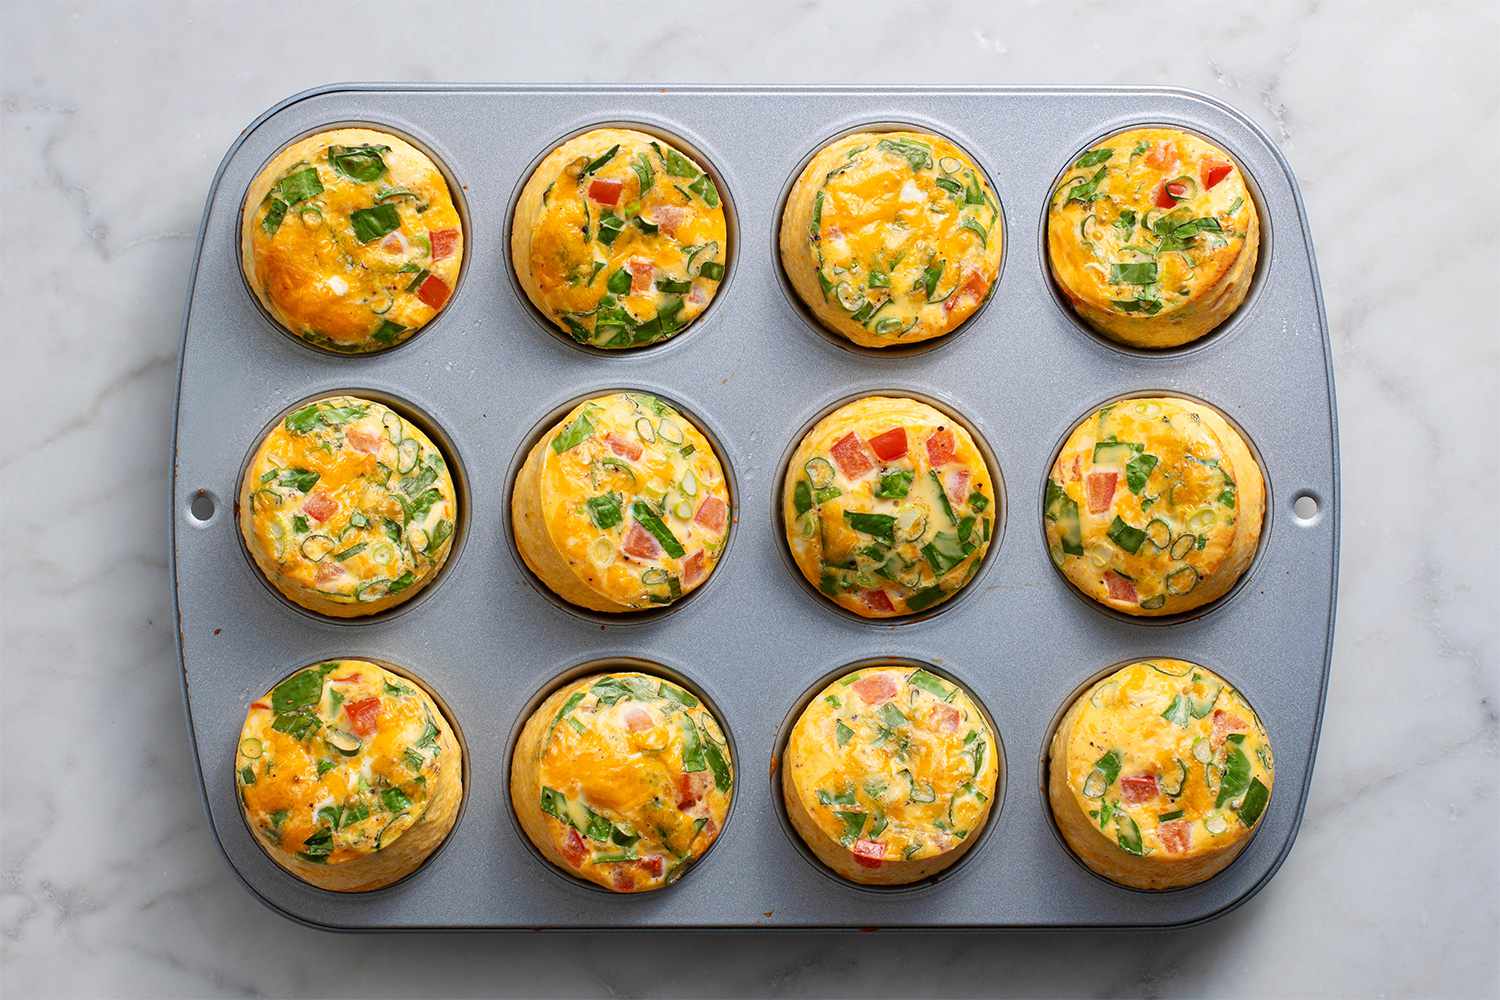 Puffy easy oven egg bites cooked in muffin tins